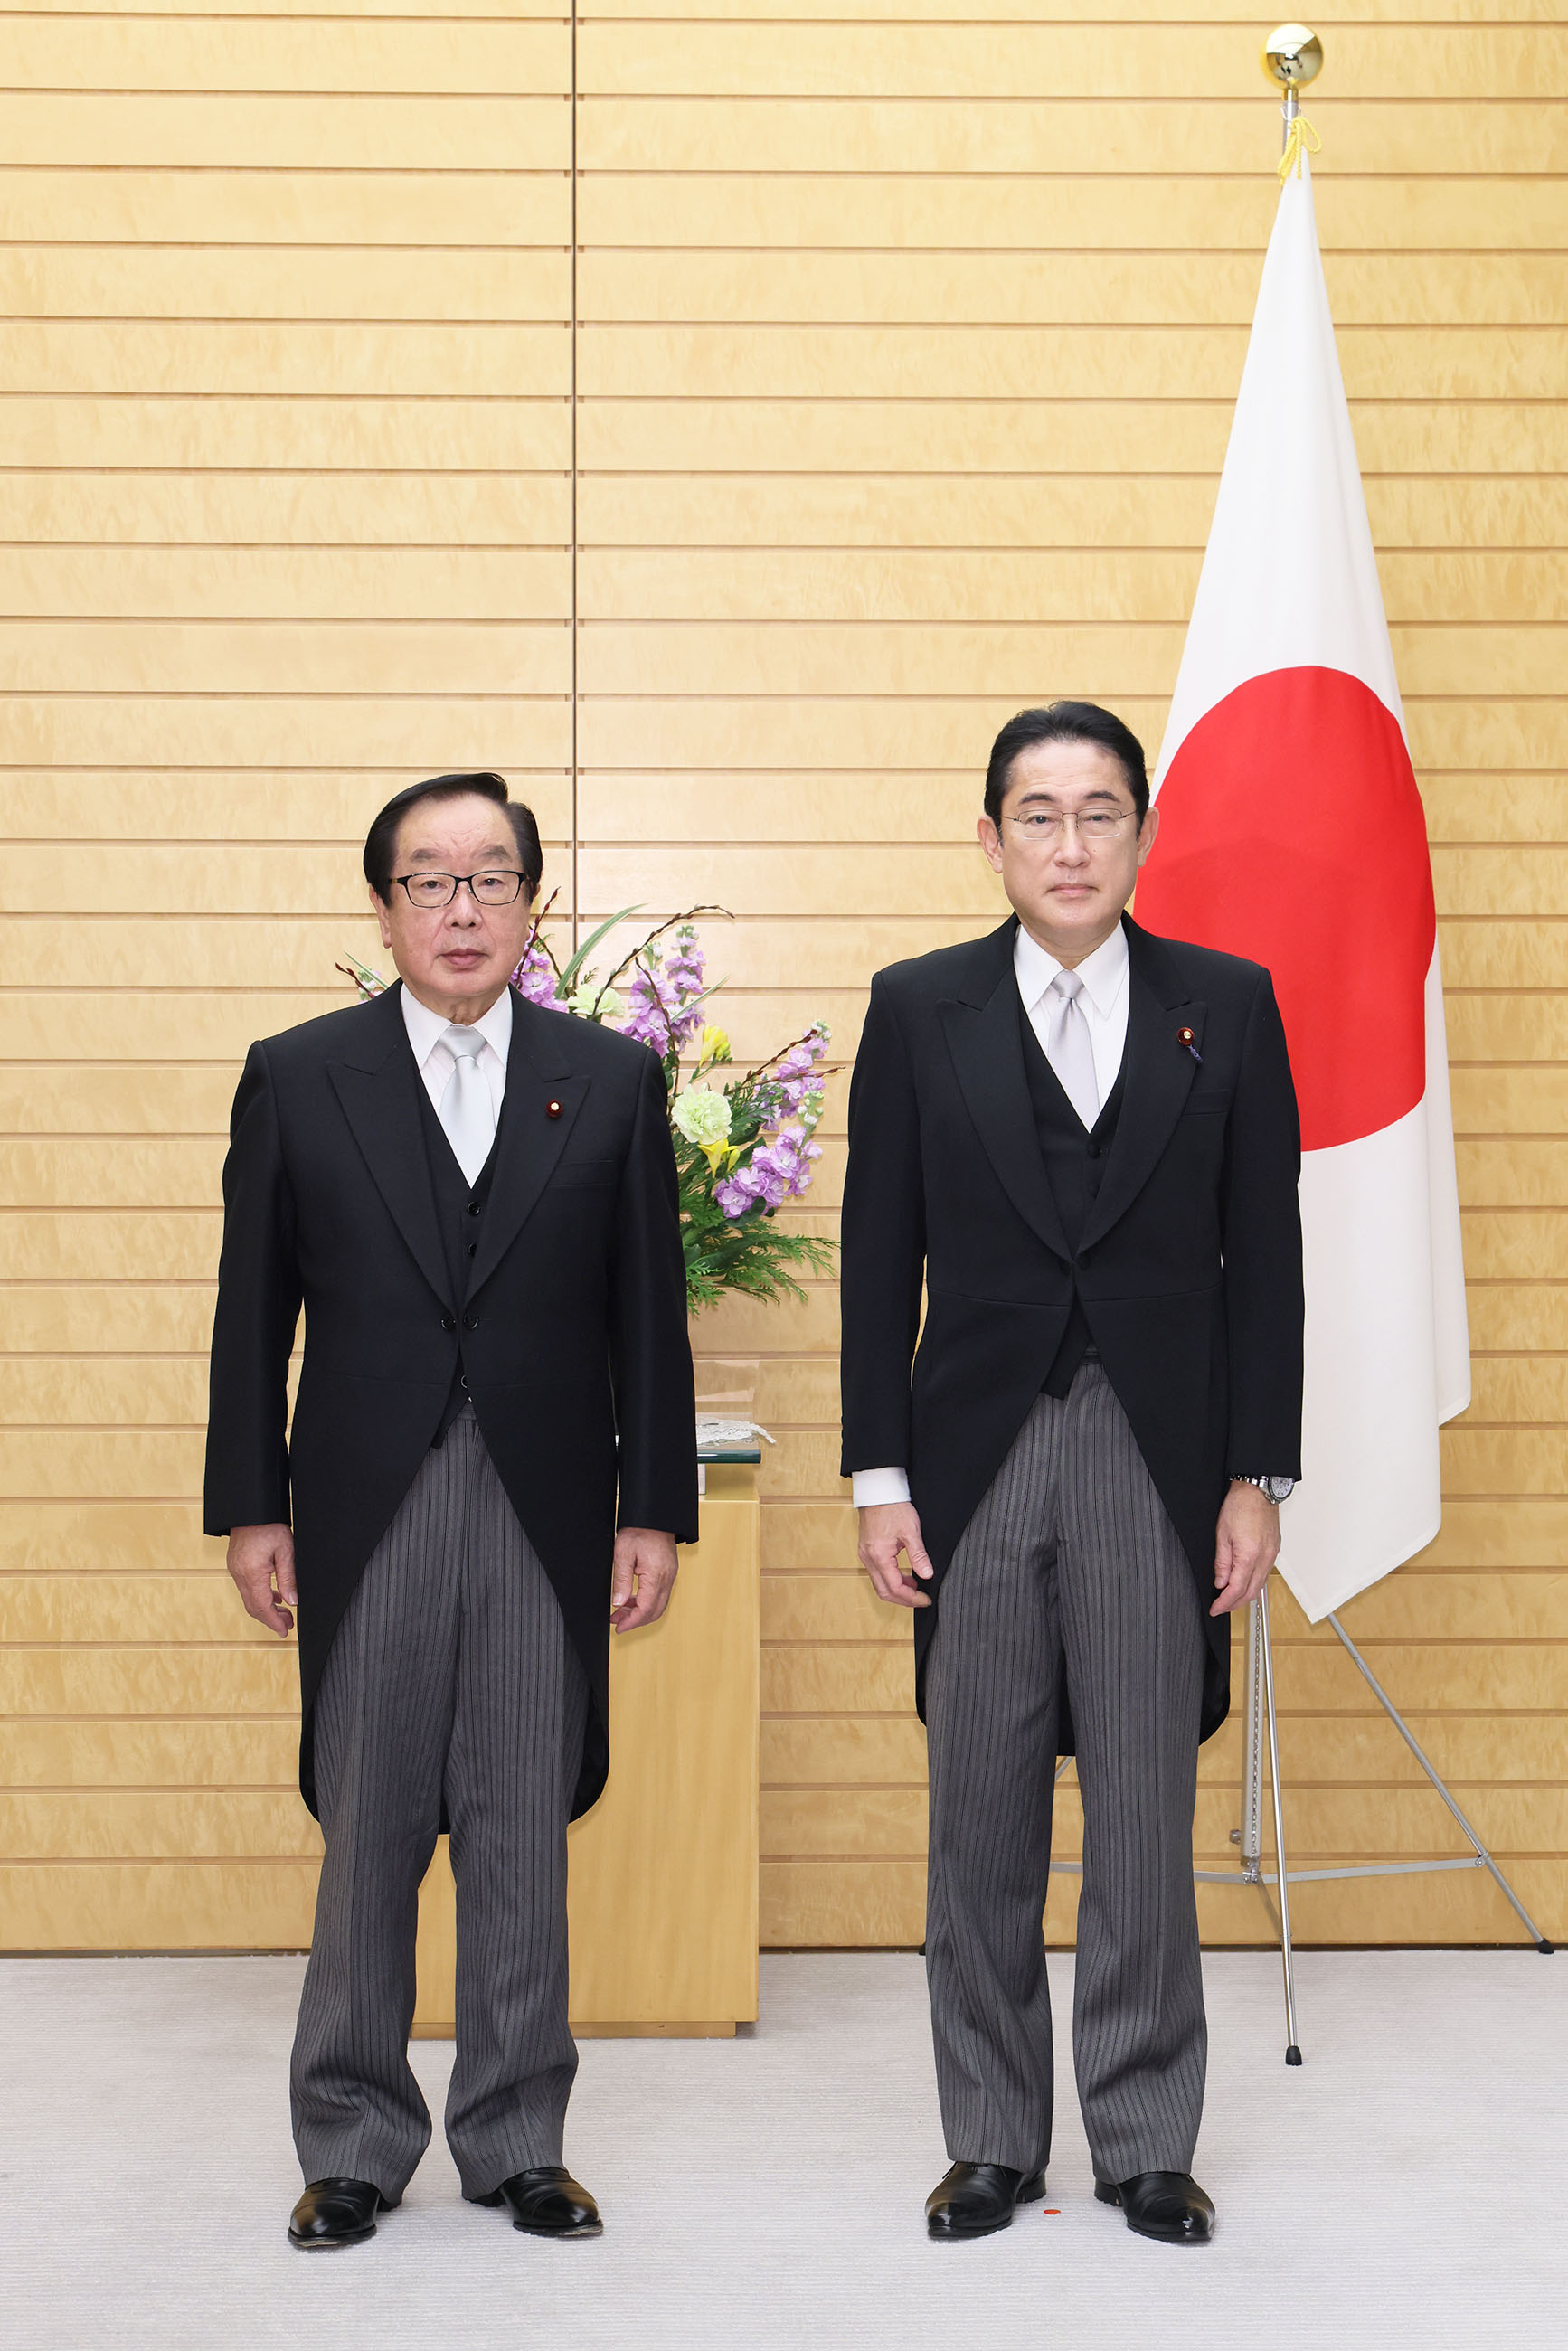 Prime Minister Kishida attending a photograph session with with the newly appointed Minister Watanabe (3)